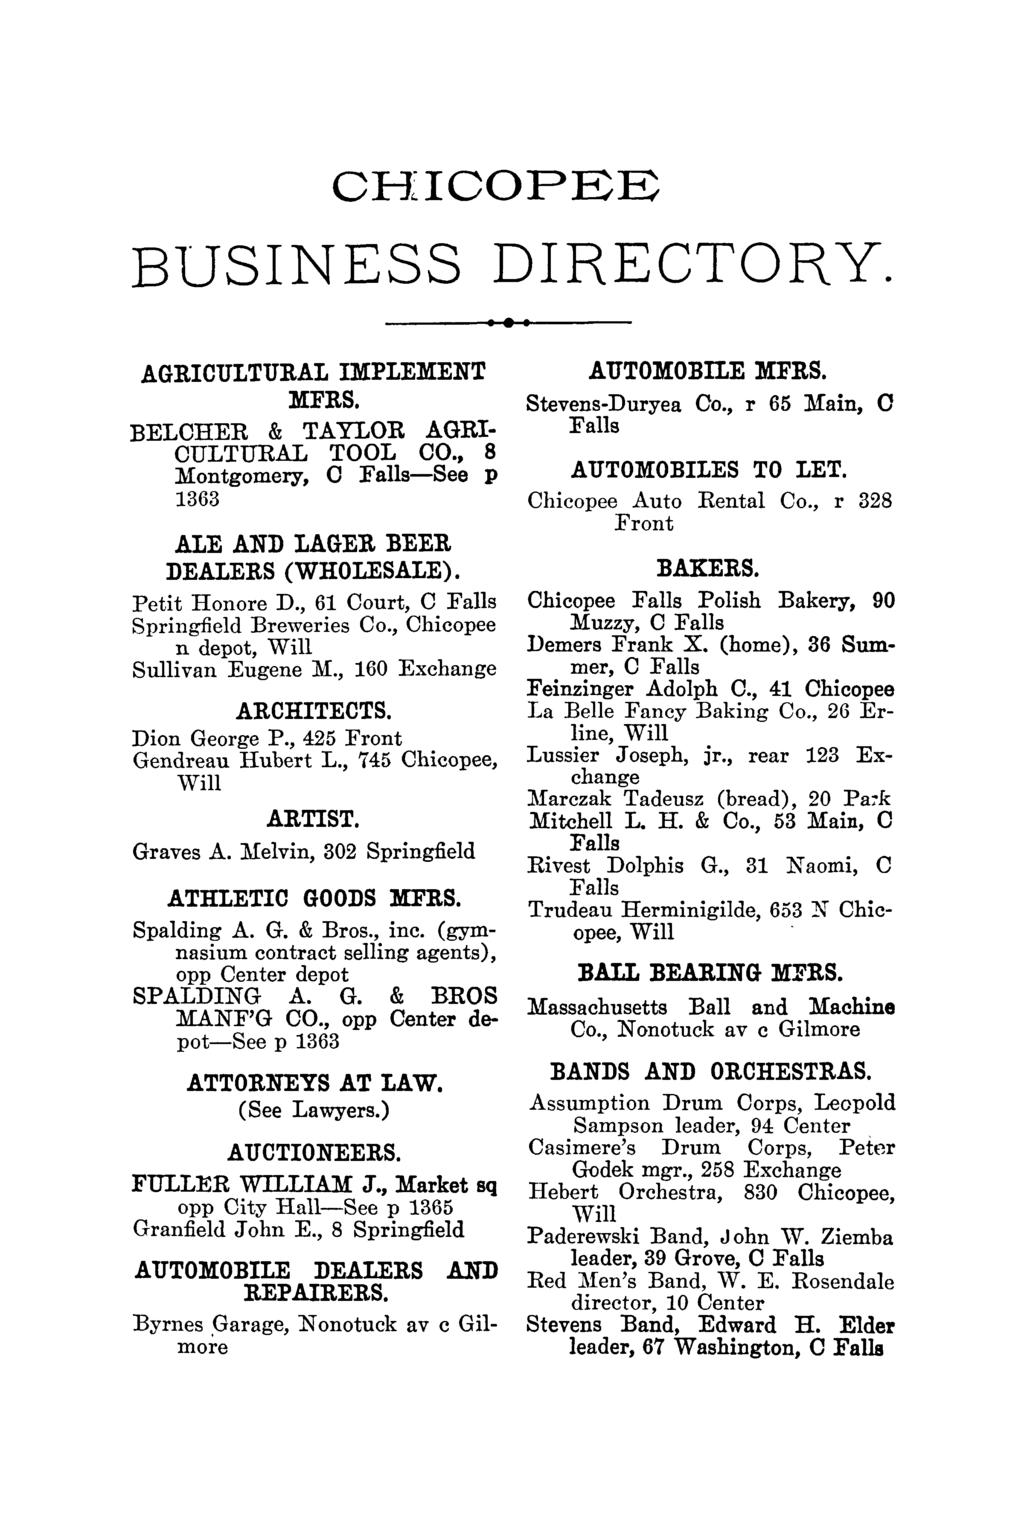 CH~ICOPEE BUSINESS DIRECTORY. AGRICULTURAL IMPLEMENT MFRS. BELCHER & TAYLOR AGRI CULTURAL TOOL CO., 8 Montgomery, 0 -See p 1363 ALE AND LAGER :BEER DEALERS (WHOLESALE). Petit Honore D.